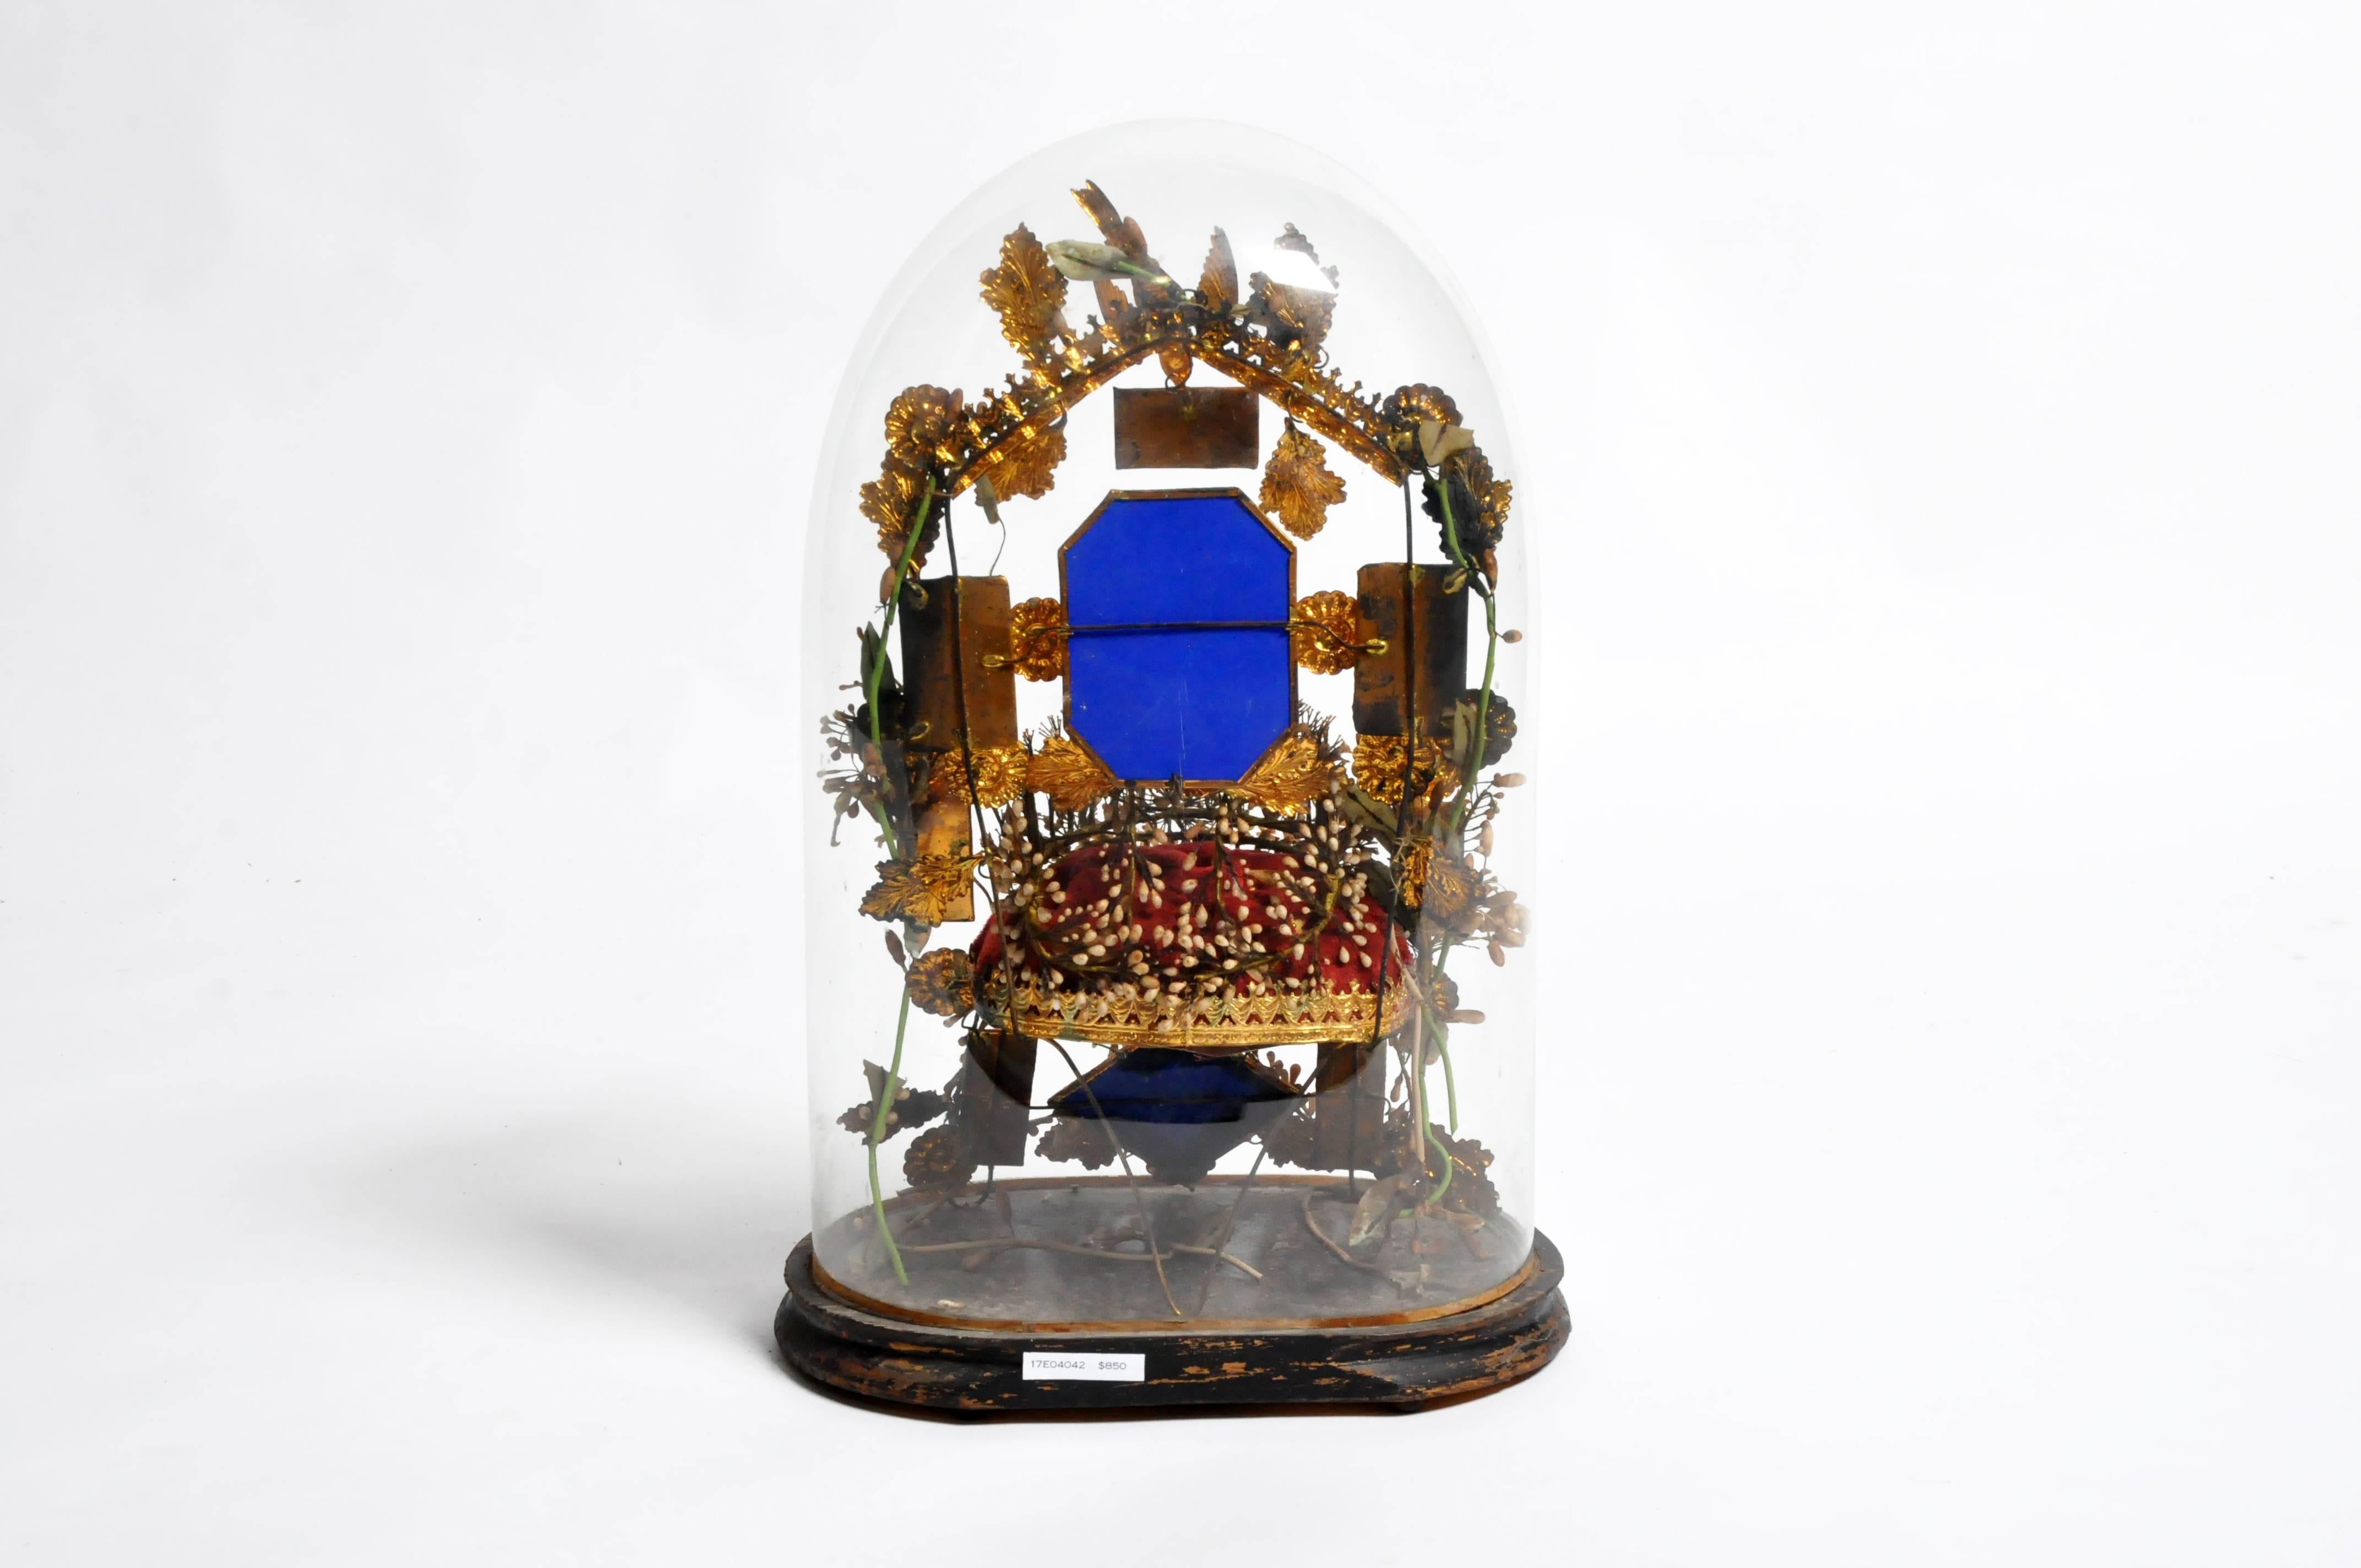 Quite the curiosity, this glass dome is more like a time capsule. Inside a miniature wire chair—with upholstered cushion—has a frame and legs made of gilt foliage, porcelain flowers, and mirrored glass. A bird-form finial holding a wreath of laurel